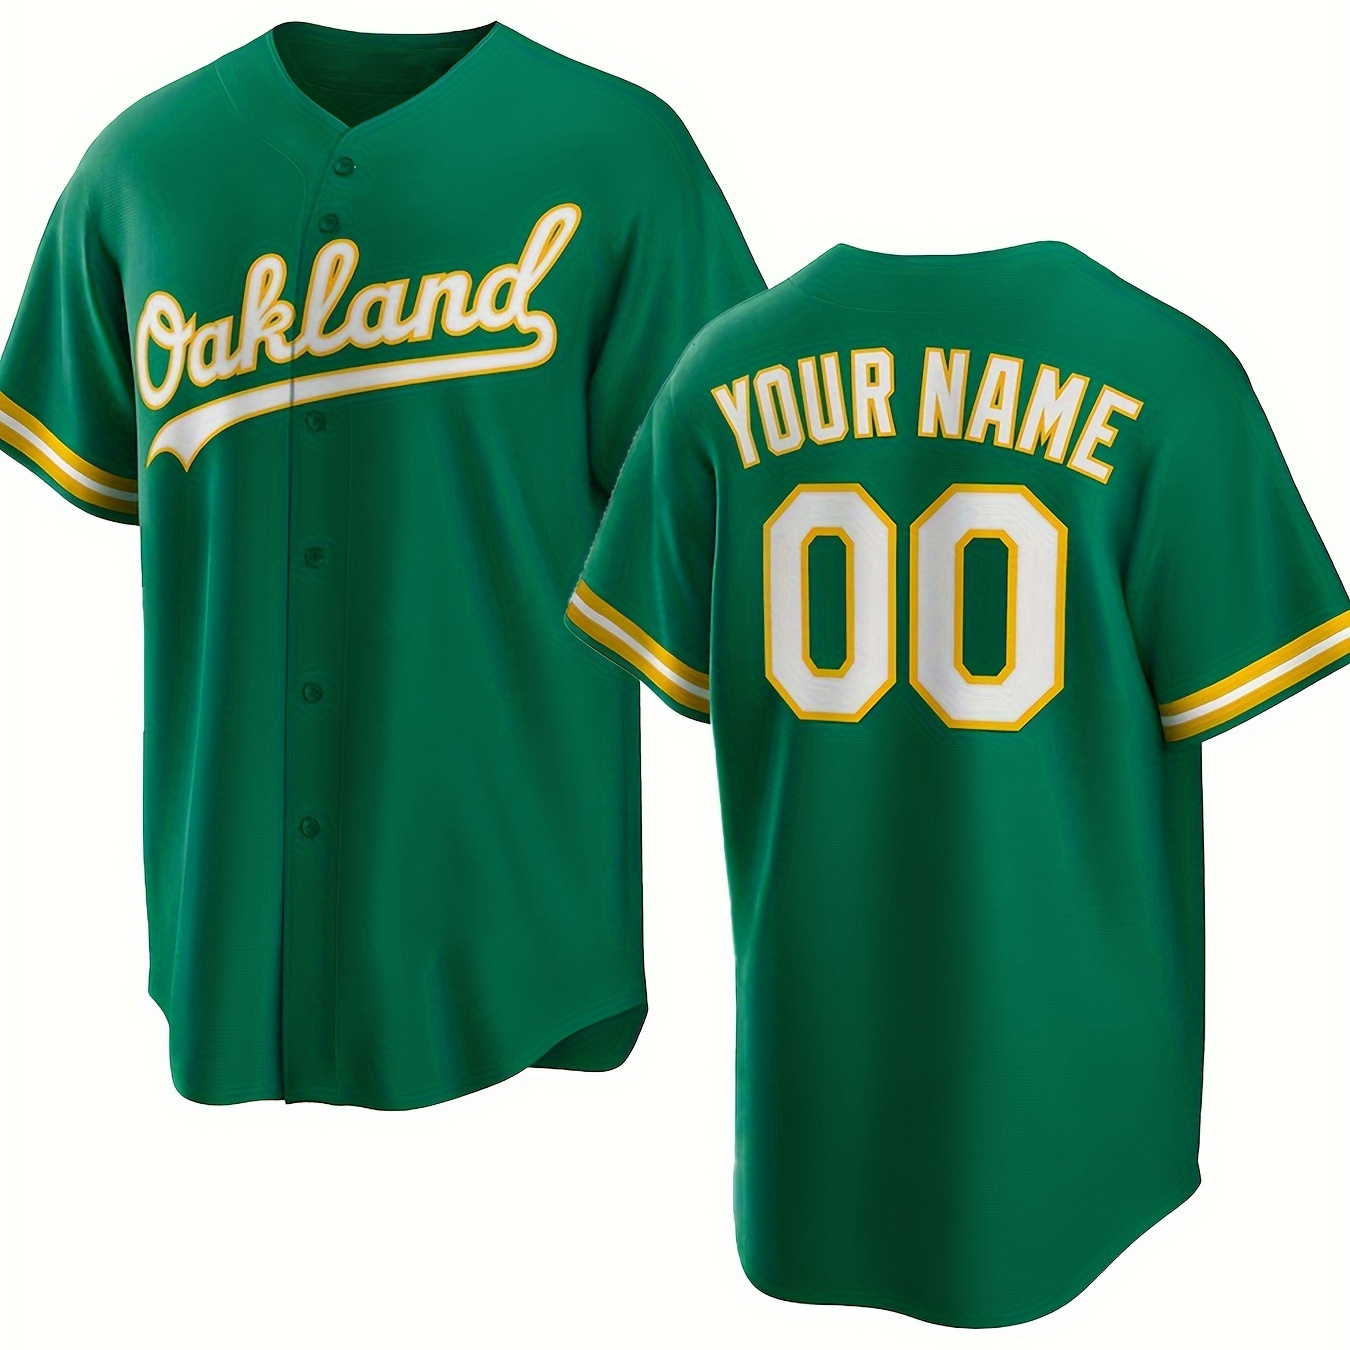 

Customized Men's Baseball Jersey, Leisure Sports Style, Personalized Name And Number, Athletic Team Uniform